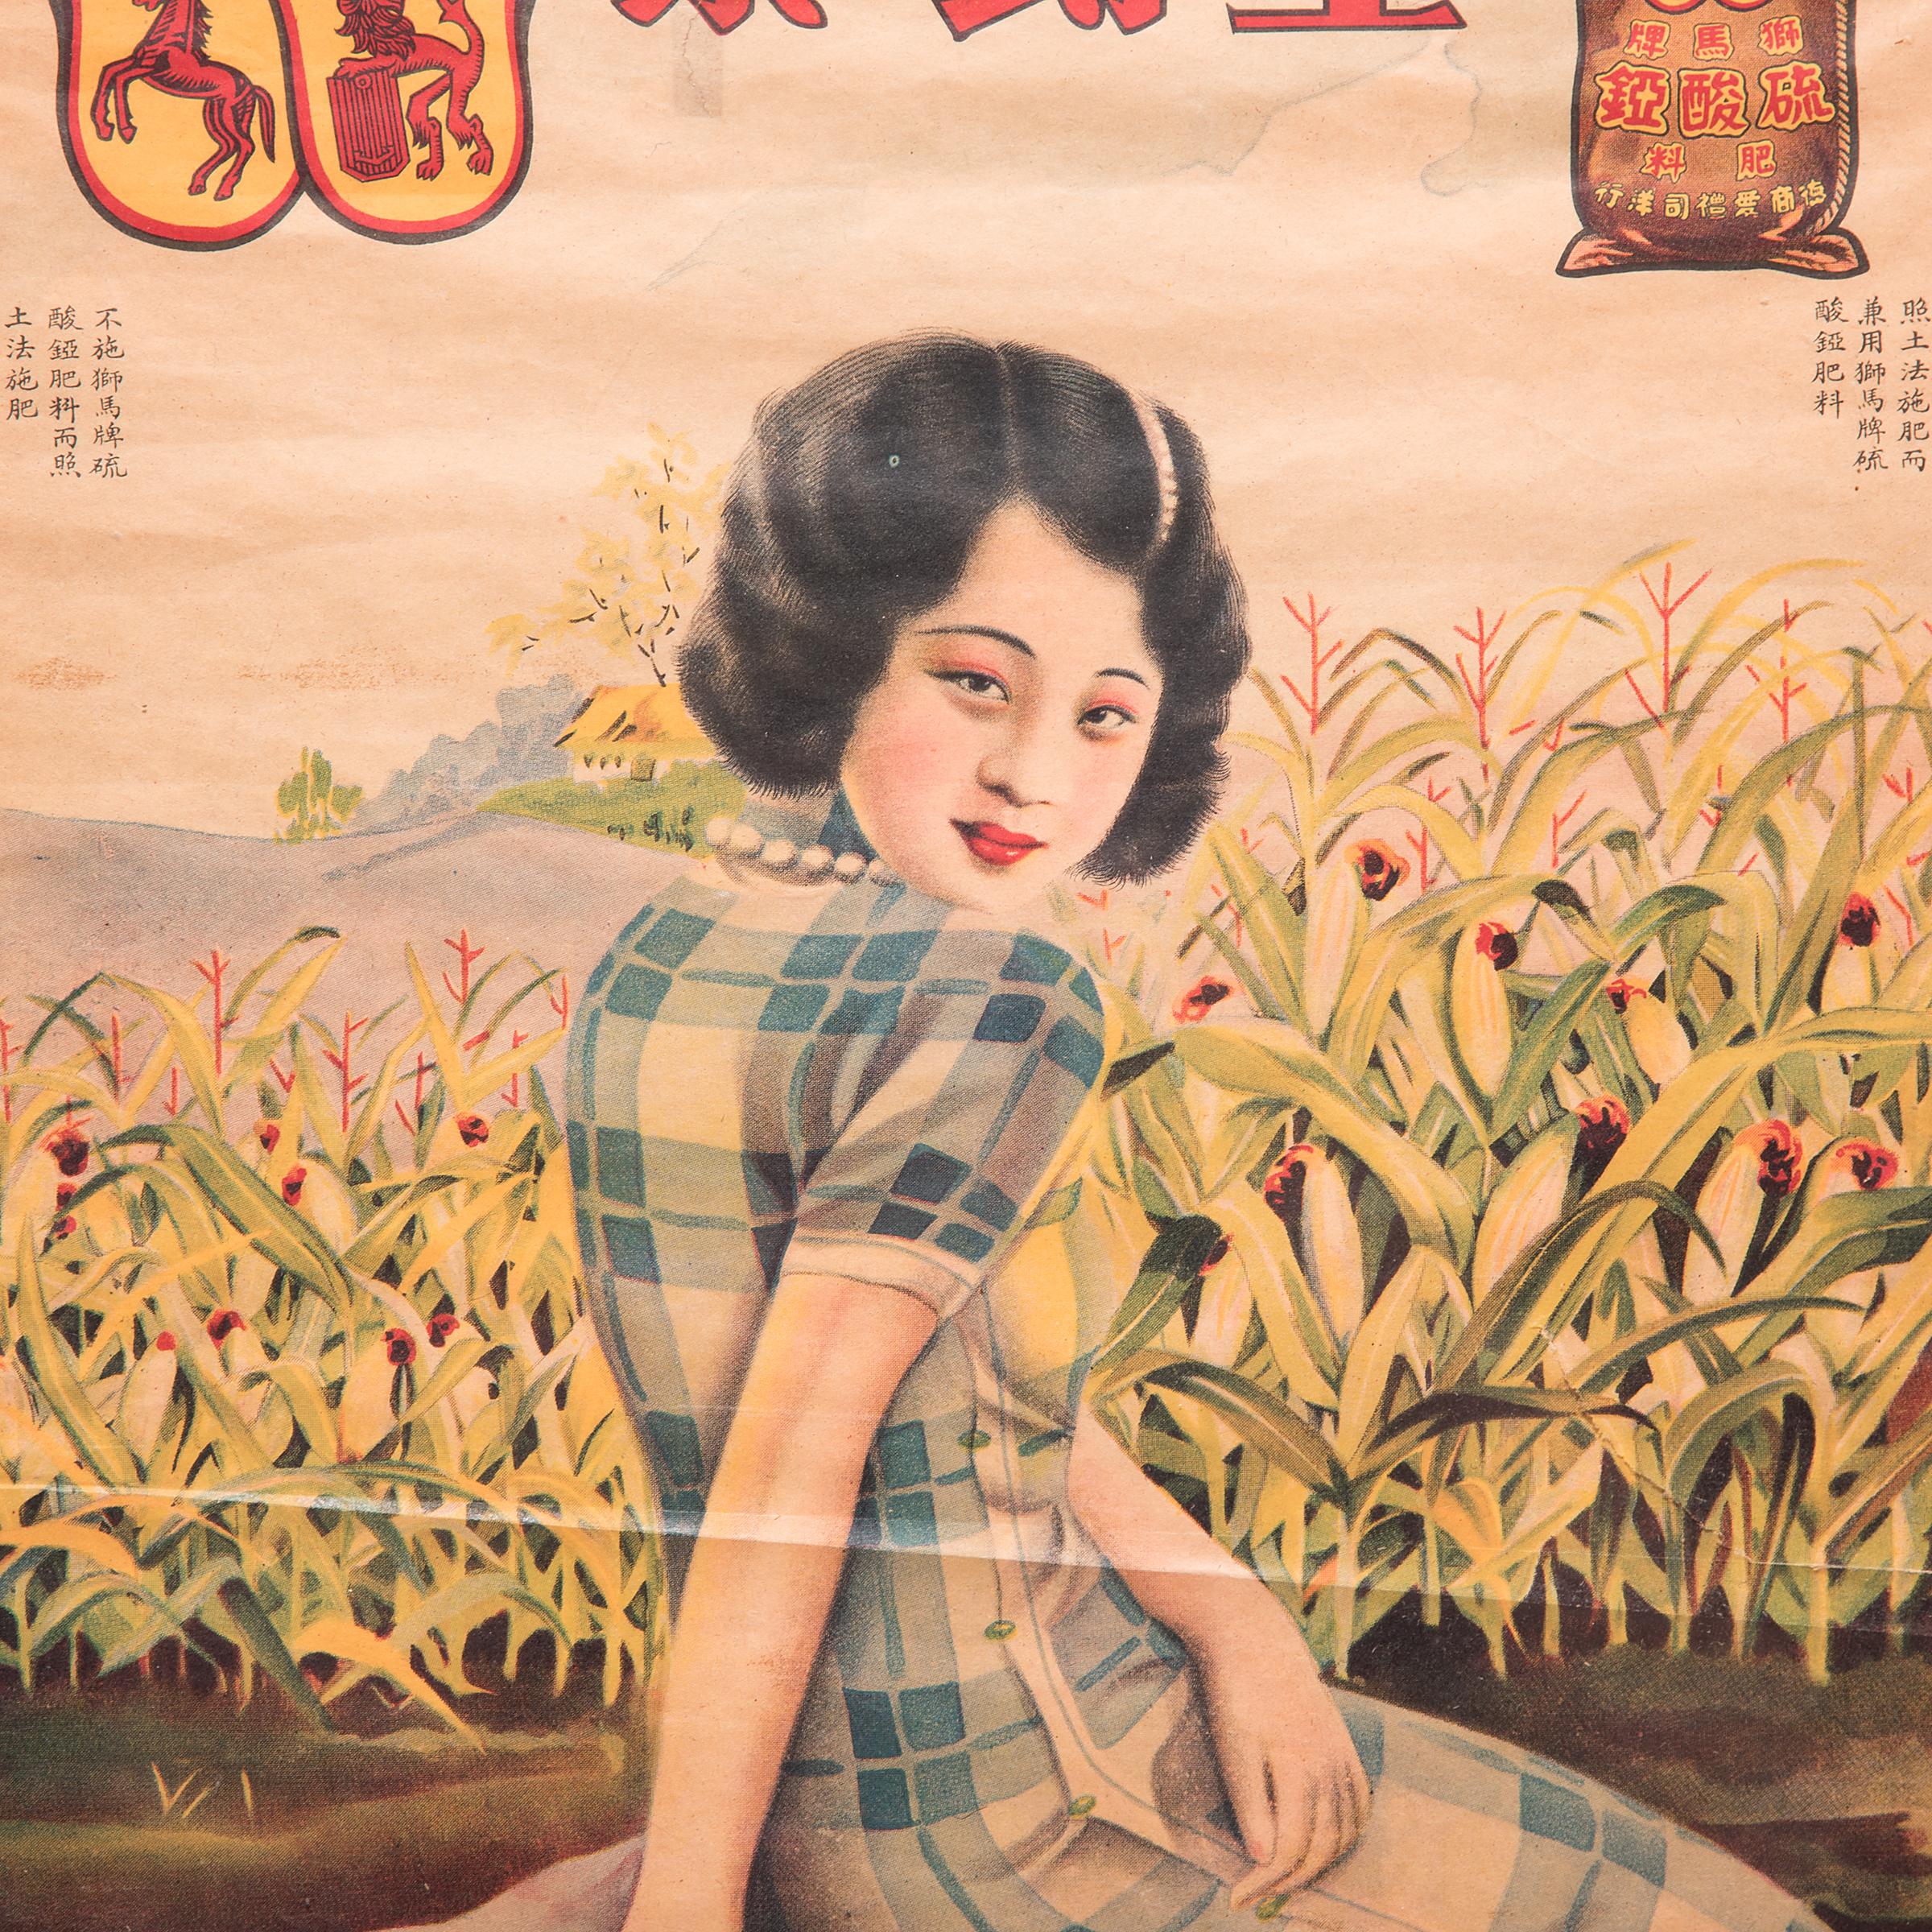 Influenced by Western advertising, commercial posters featuring beautiful women in modern settings gained popularity in China in the 1920s and 1930s. Posters like this one came to symbolize prosperity and fortune and were often purchased by Chinese